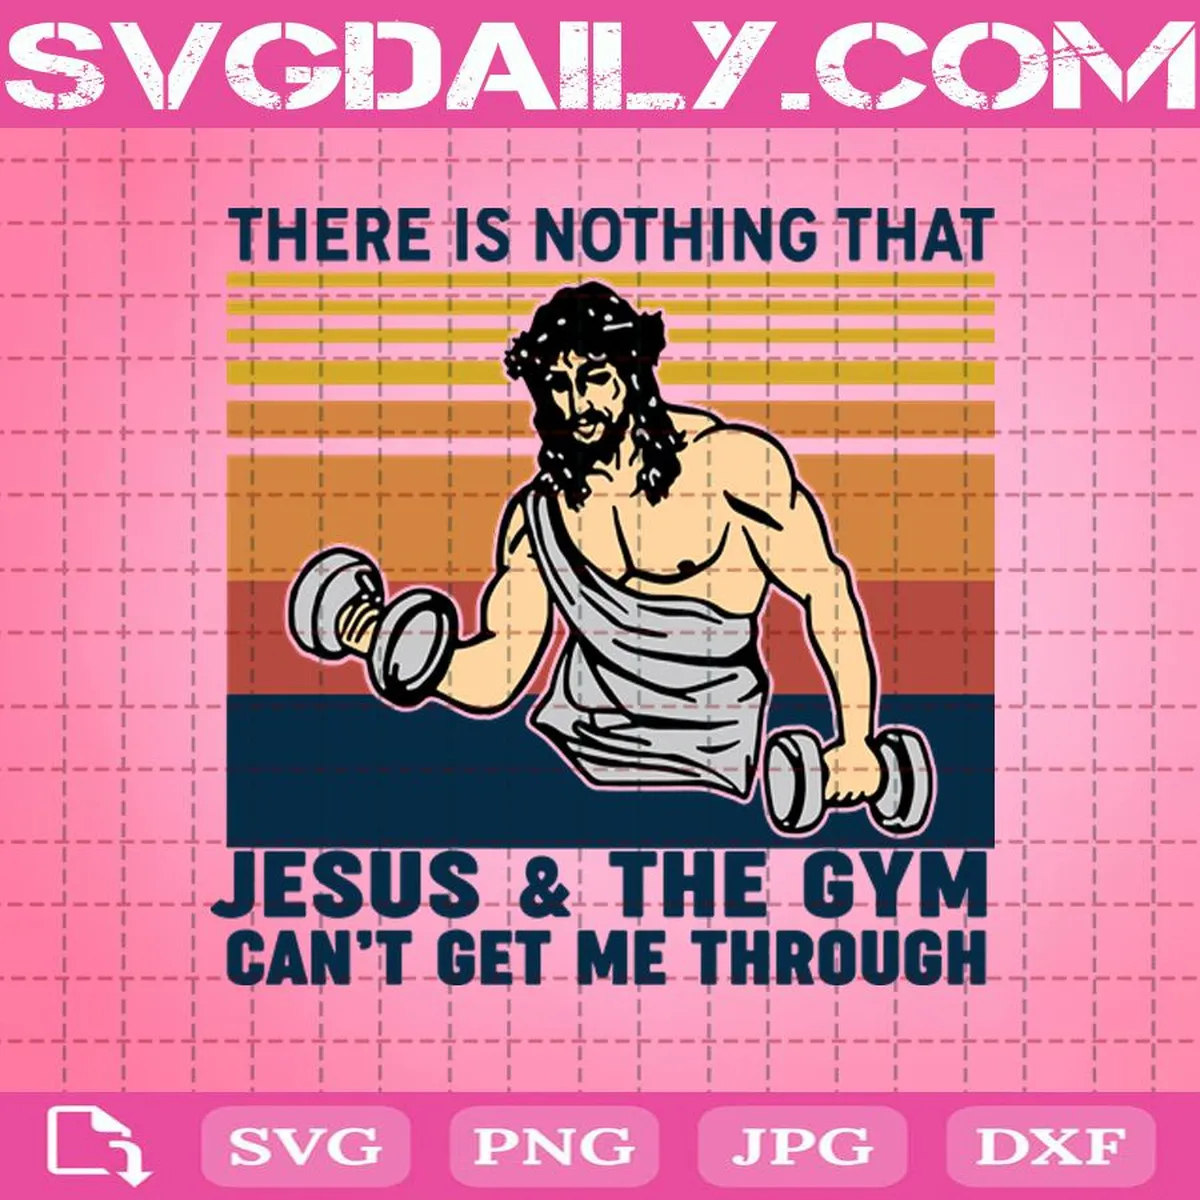 There Is Nothing That Jesus And The Gym Can’t Get Me Through Svg, Funny Gymnastic Quote Svg, Jesus And The Gym Svg